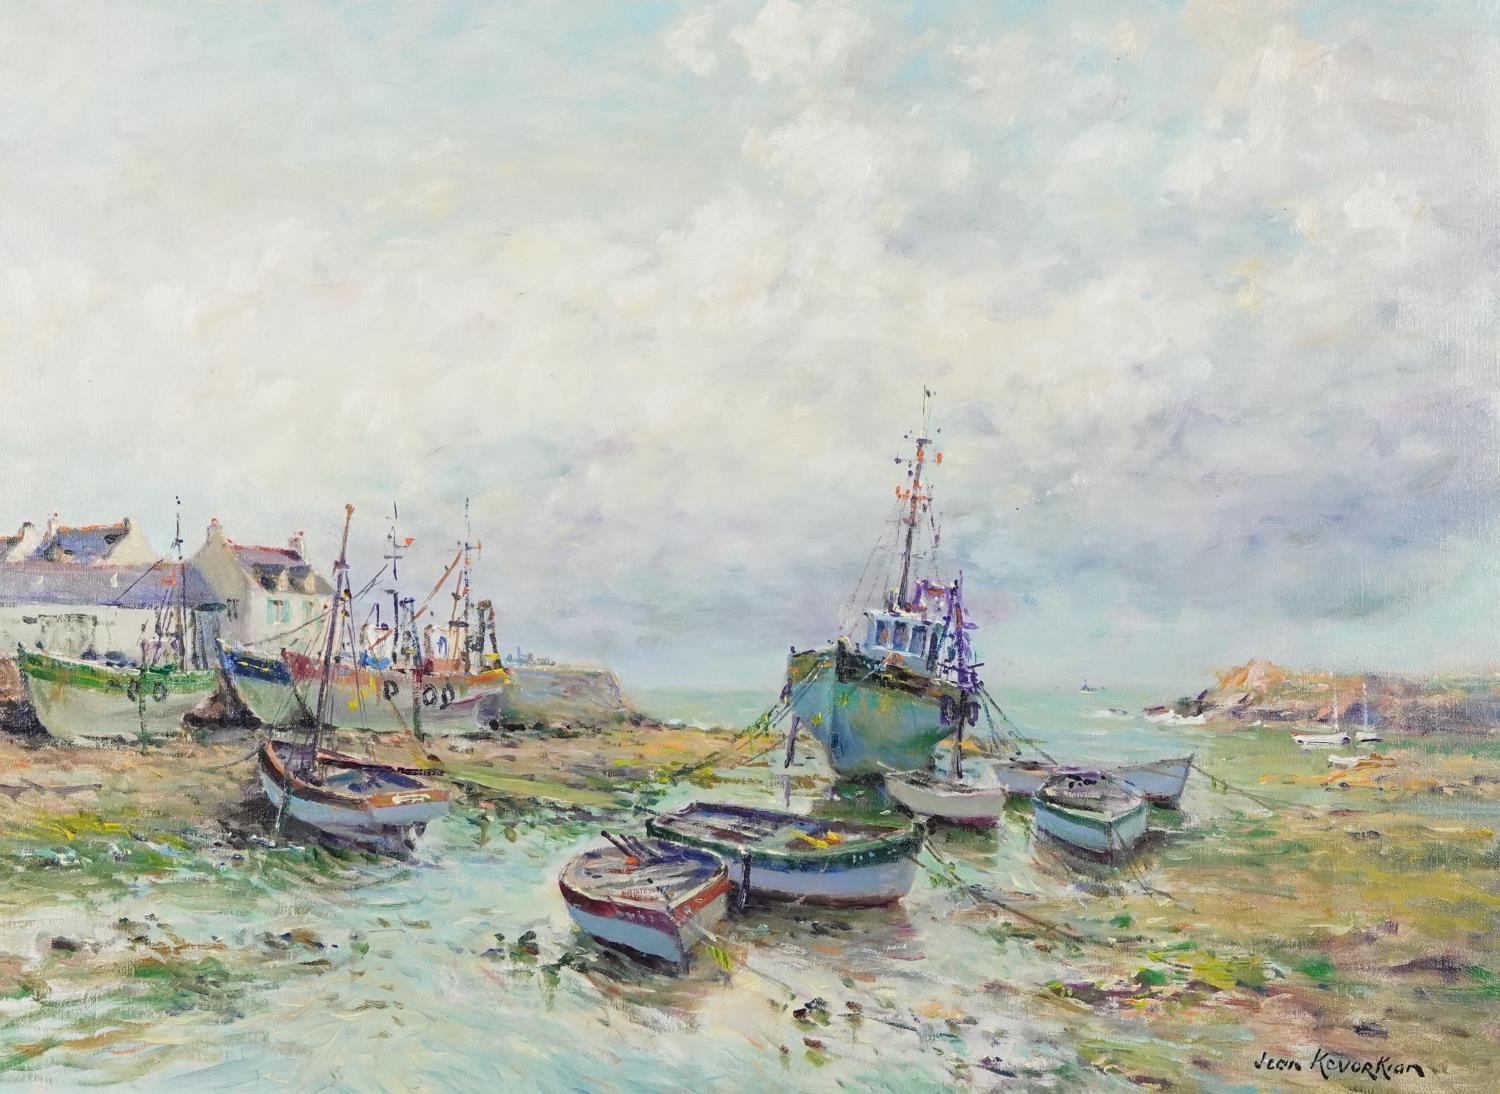 Jean Kevorkian - Marée basse, moored fishing boats, contemporary French oil on canvas, inscribed